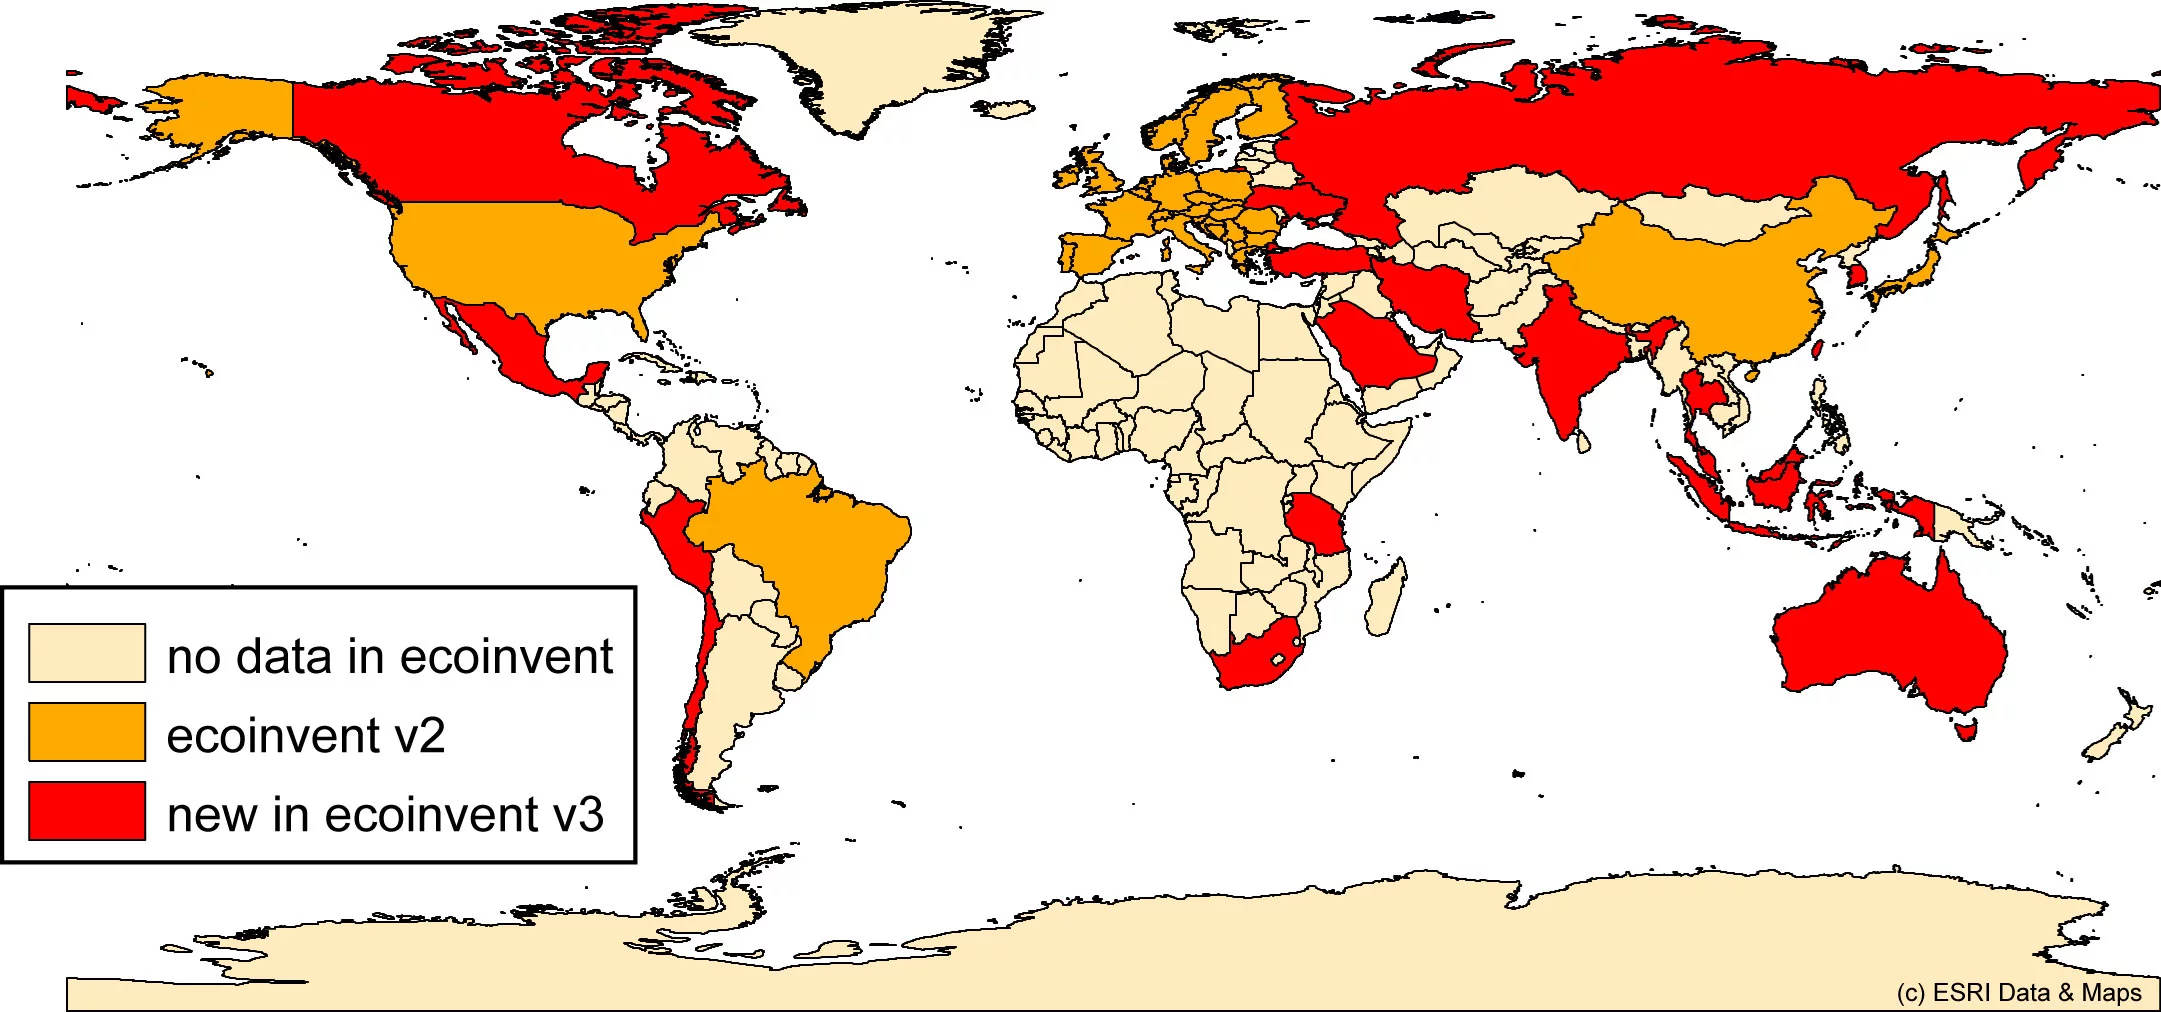 The ecoinvent database is becoming more and more comprehensive. On the map : in orange, countries with inventory data for electricity production in the second version of ecoinvent, in red: countries that have been added in the third version. The rest are countries for which there is no data for electricity production in ecoinvent.Source: Paul Scherrer Institute.